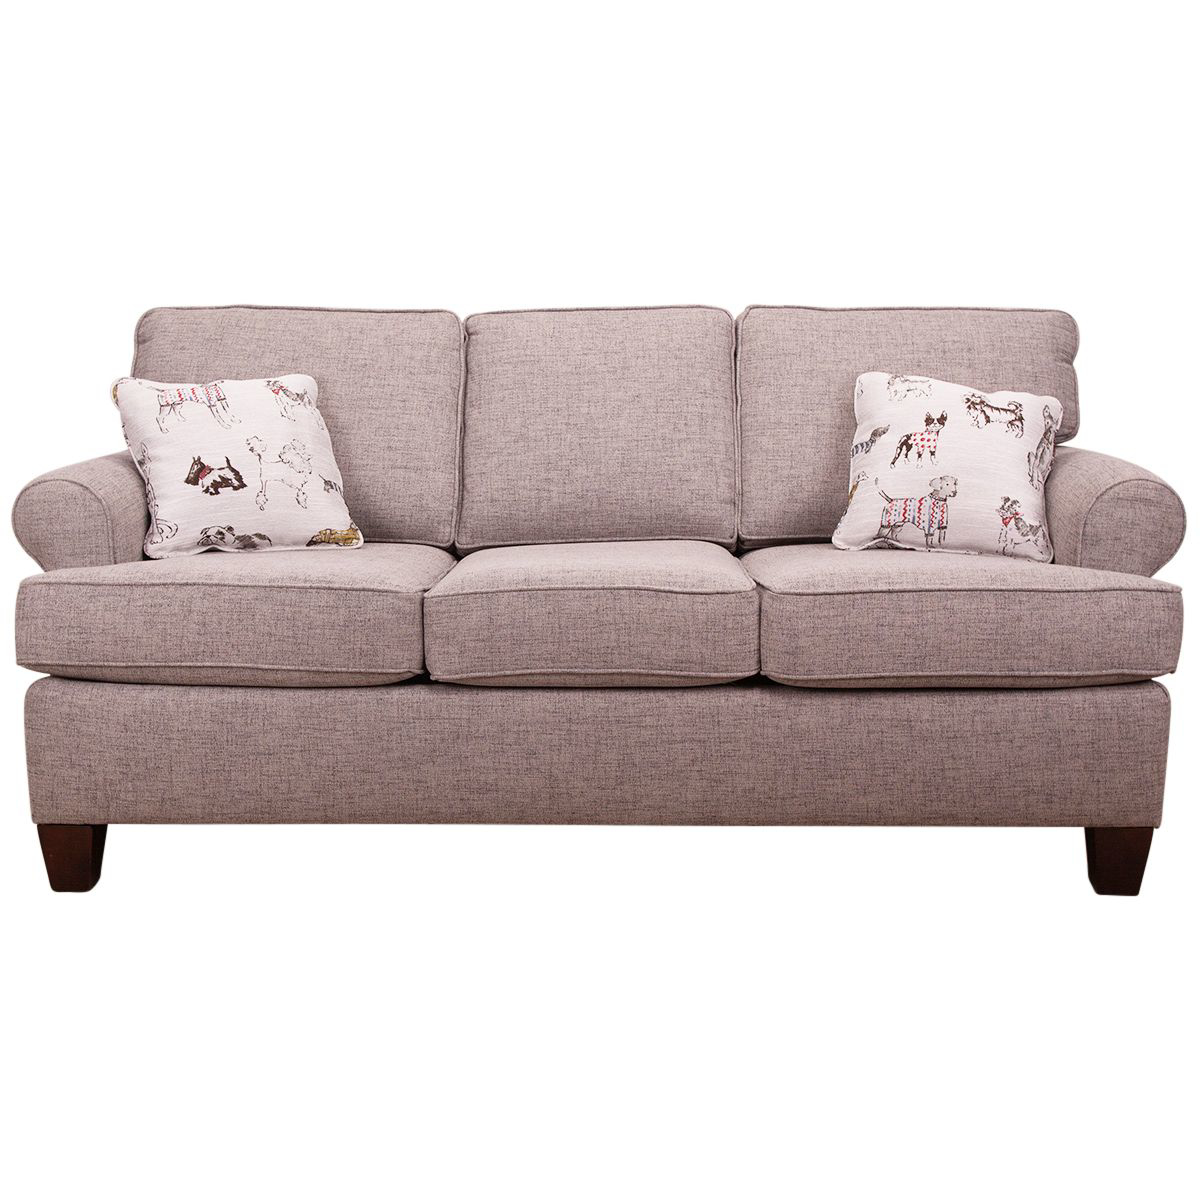 Picture of WEAVER SOFA W/FRAME COIL